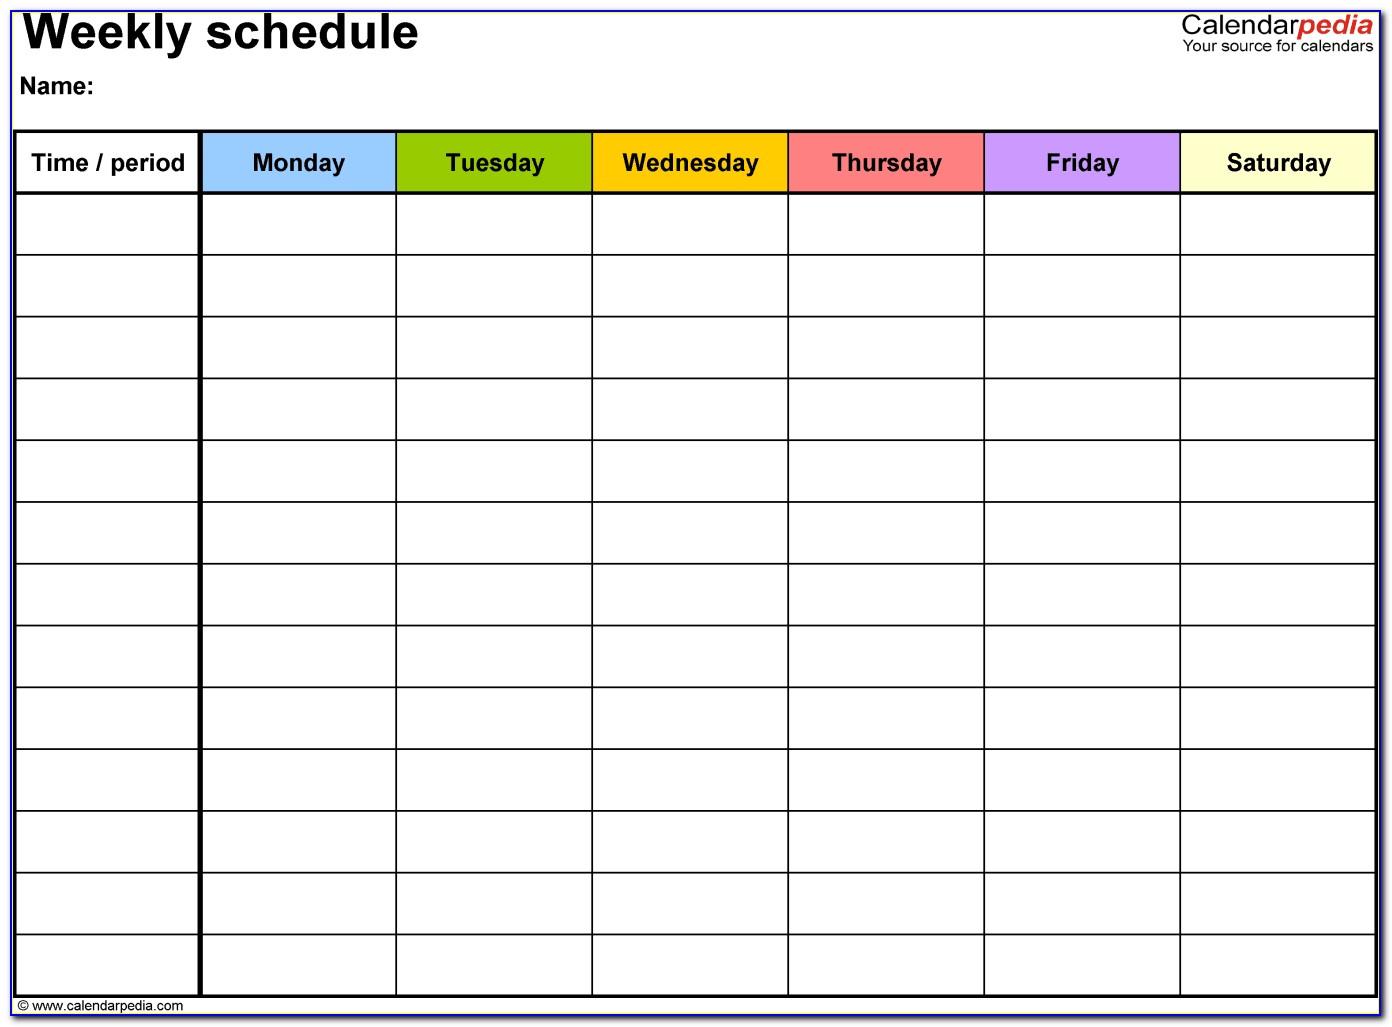 Schedule Template For Excel Weekly